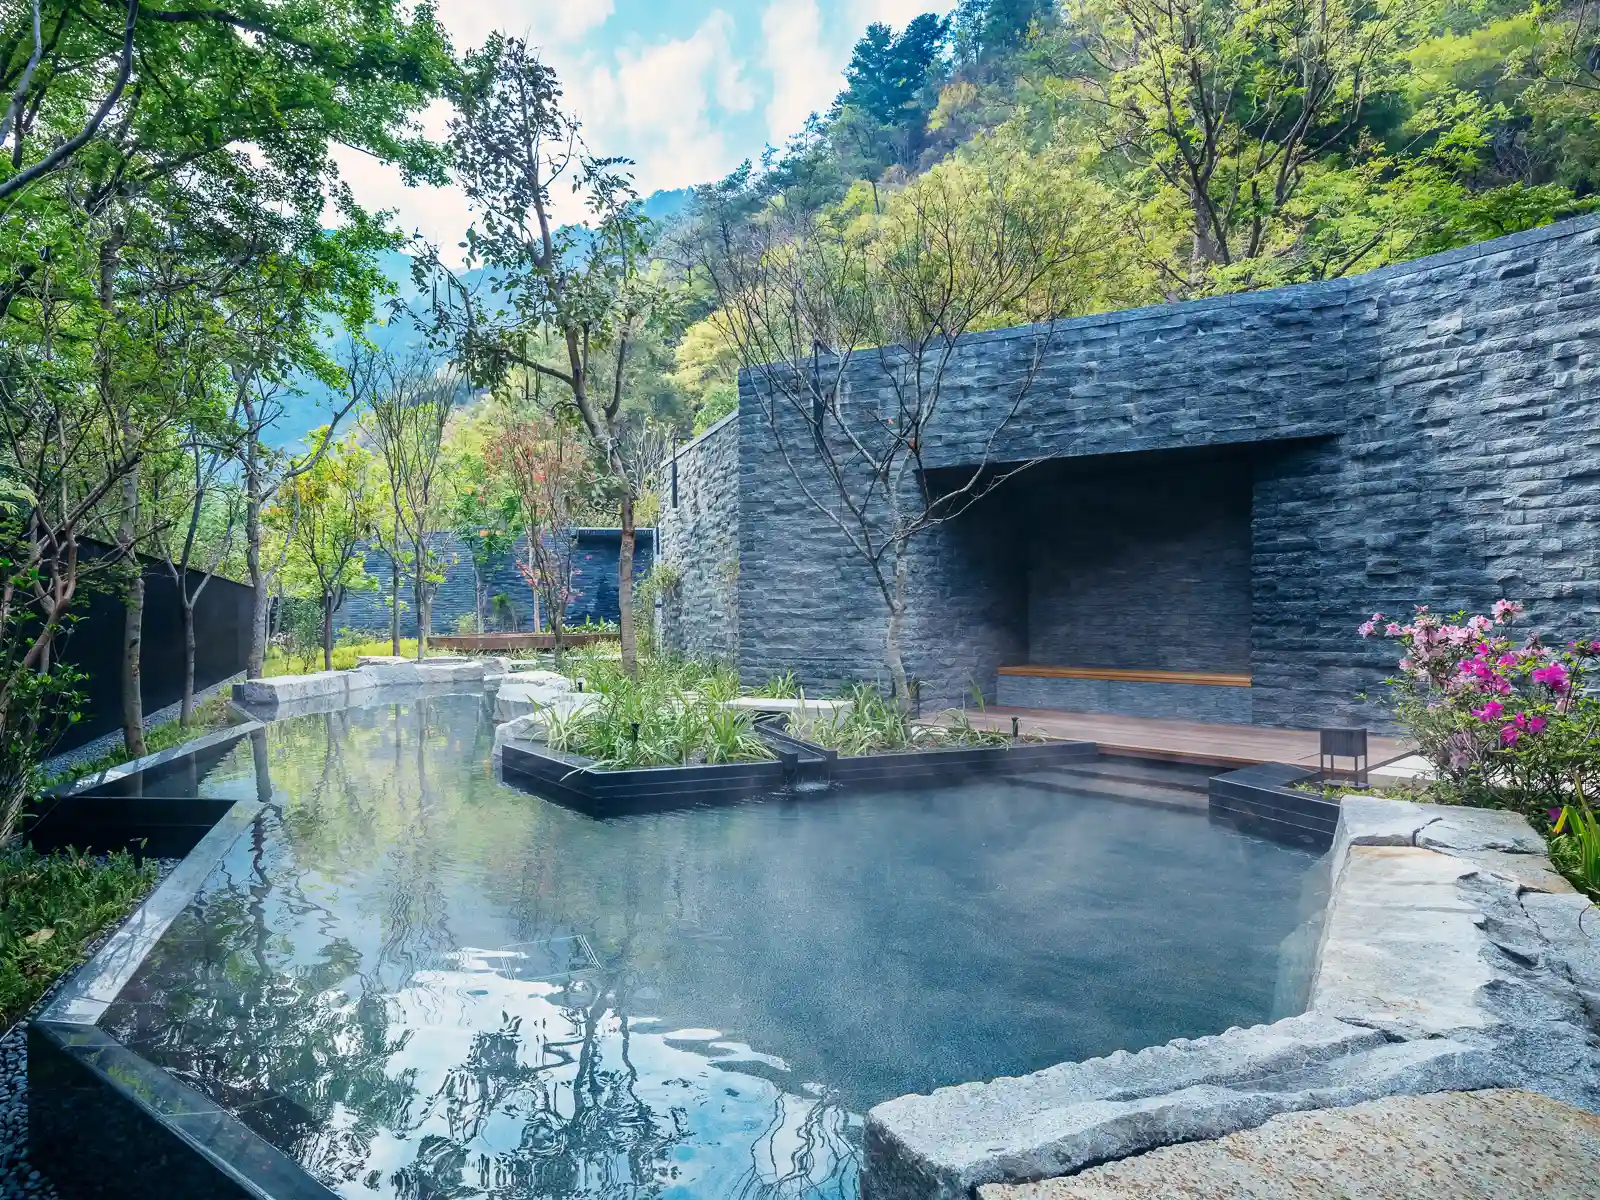 Water steams in another outdoor hot spring pool.